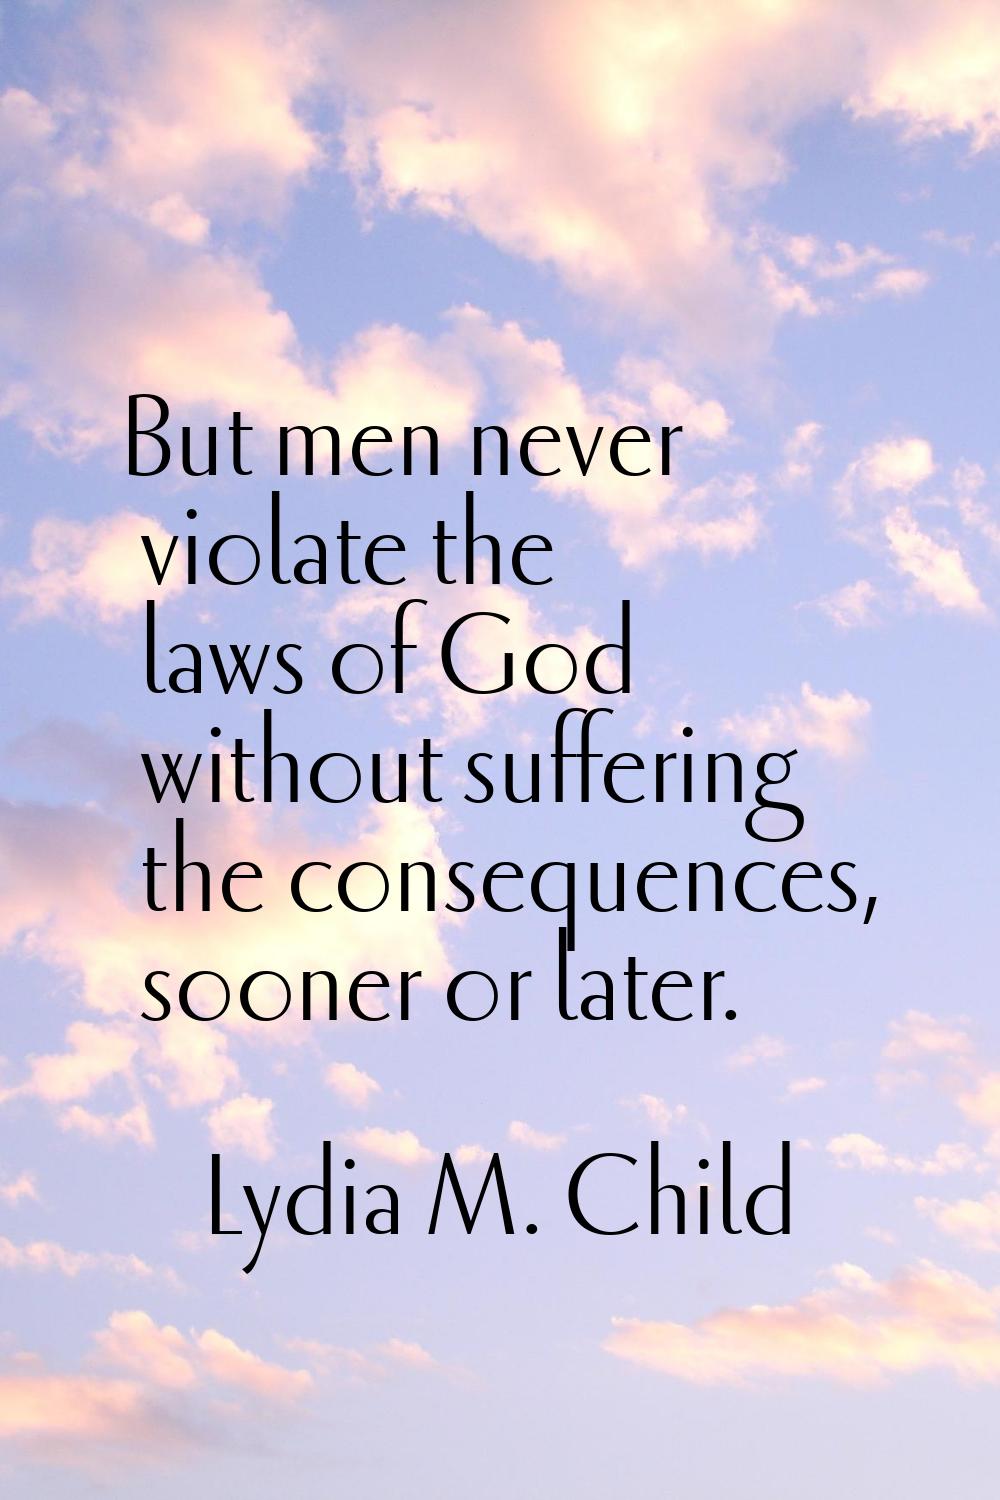 But men never violate the laws of God without suffering the consequences, sooner or later.